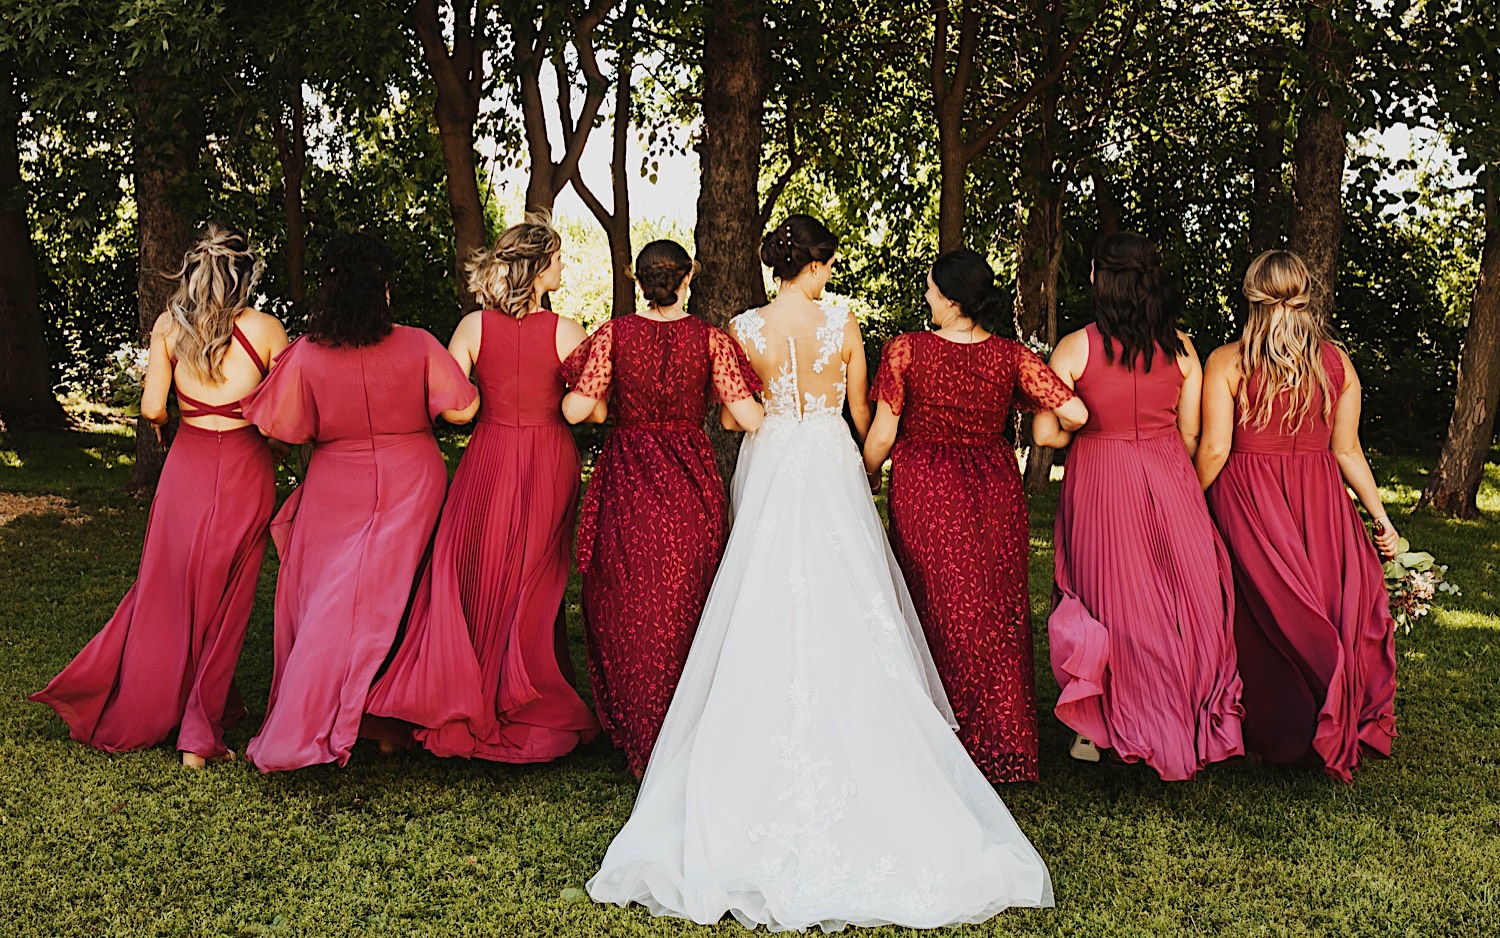 A bride and her bridesmaids lock arms and face away from the camera towards a row of trees after an outdoor wedding ceremony at Legacy Hill Farm